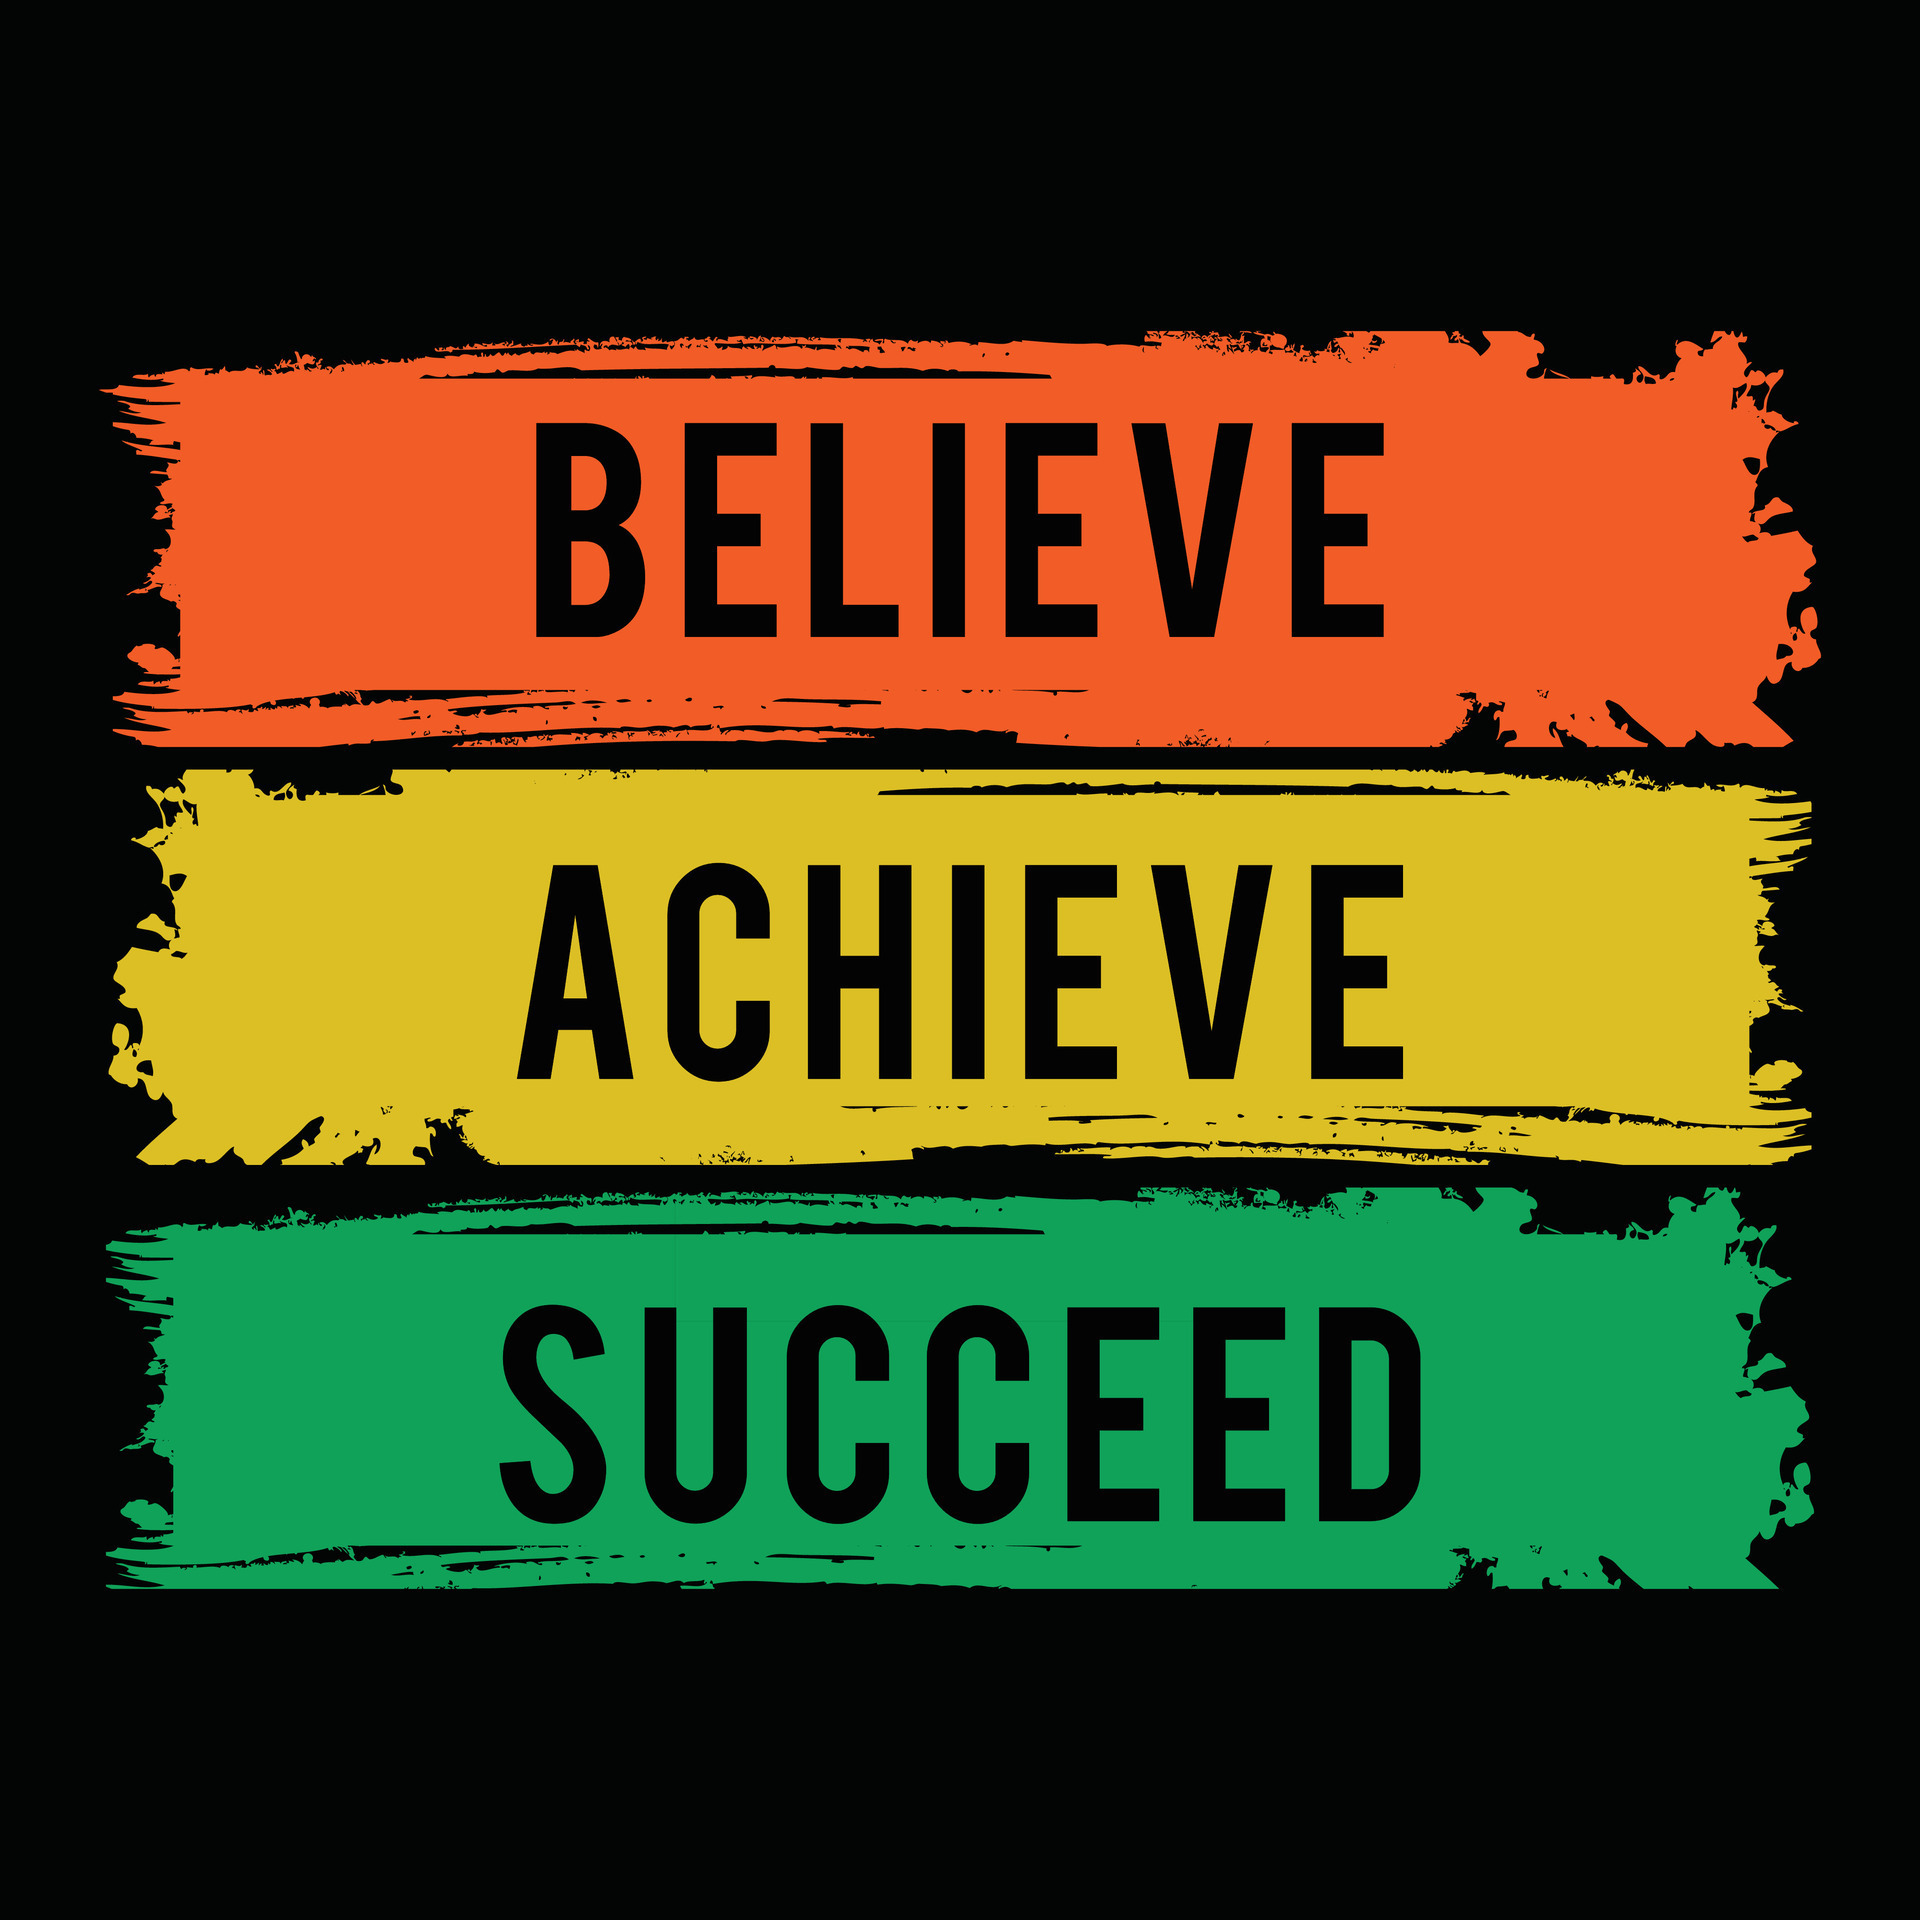 Believe achieve succeed motivational quotes typography t shirt